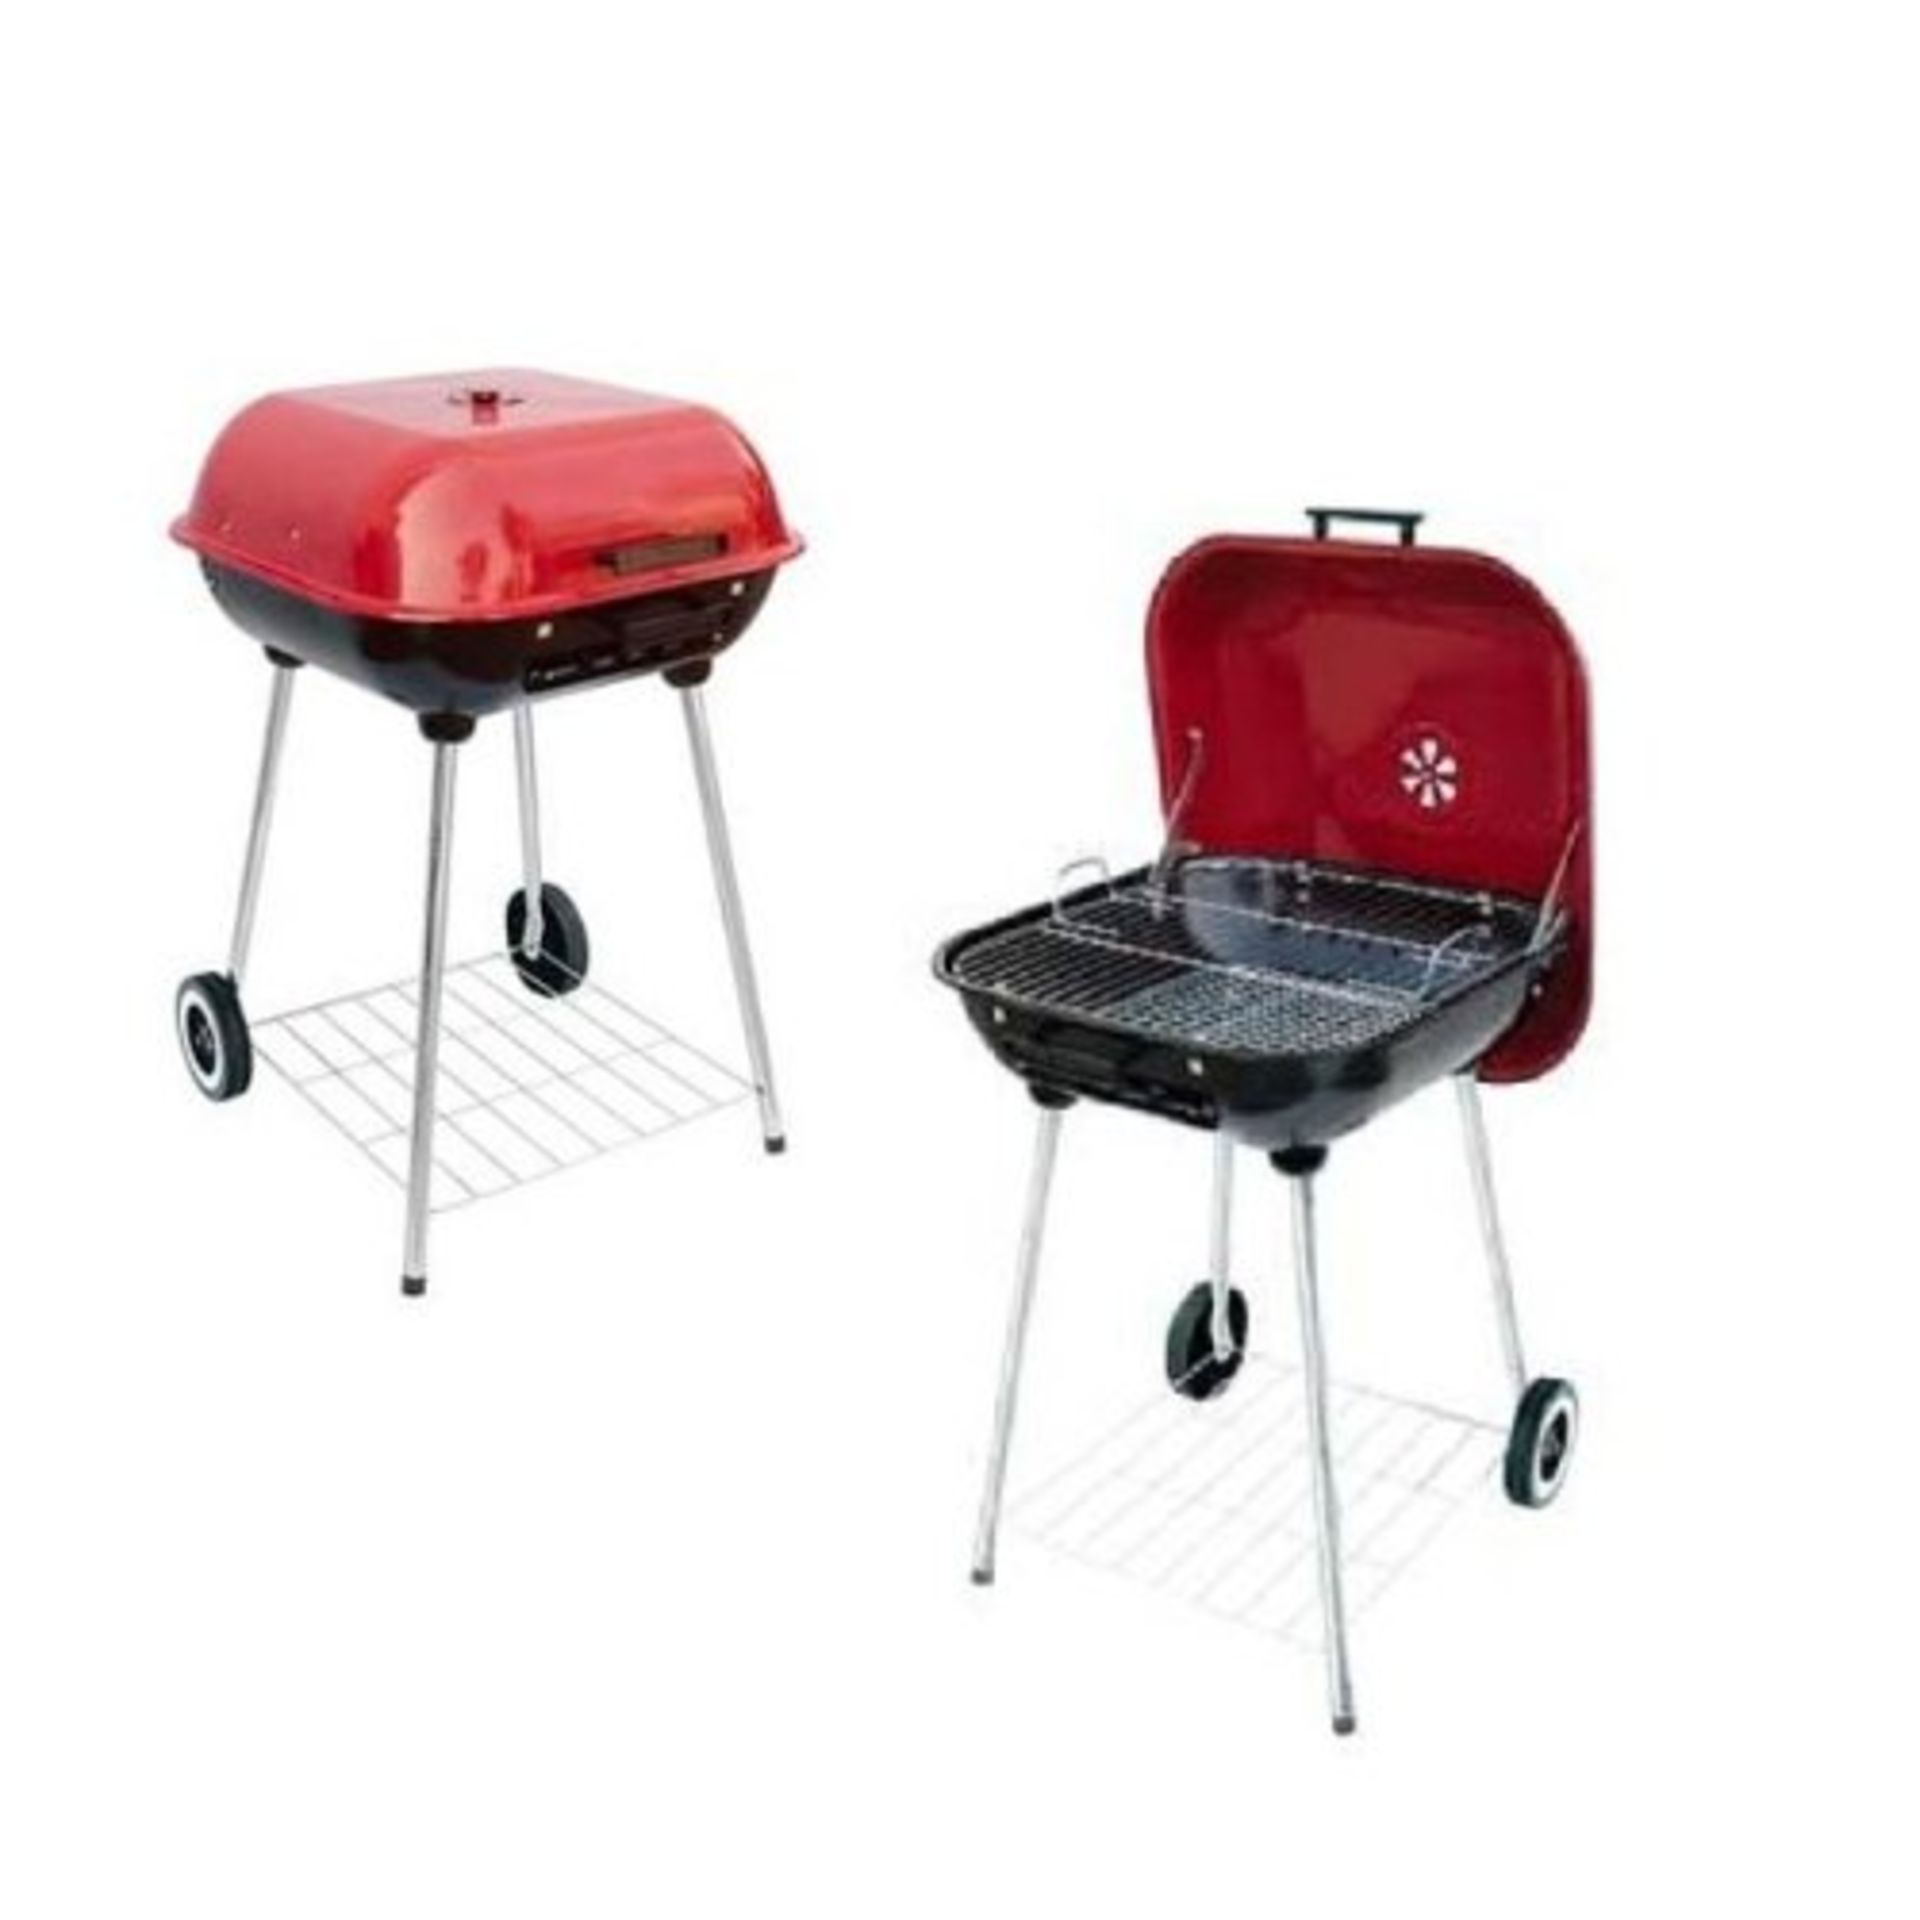 No VAT Brand New Mastercook 54cm Stainless Steel Charcoal Barbecue With Red Top